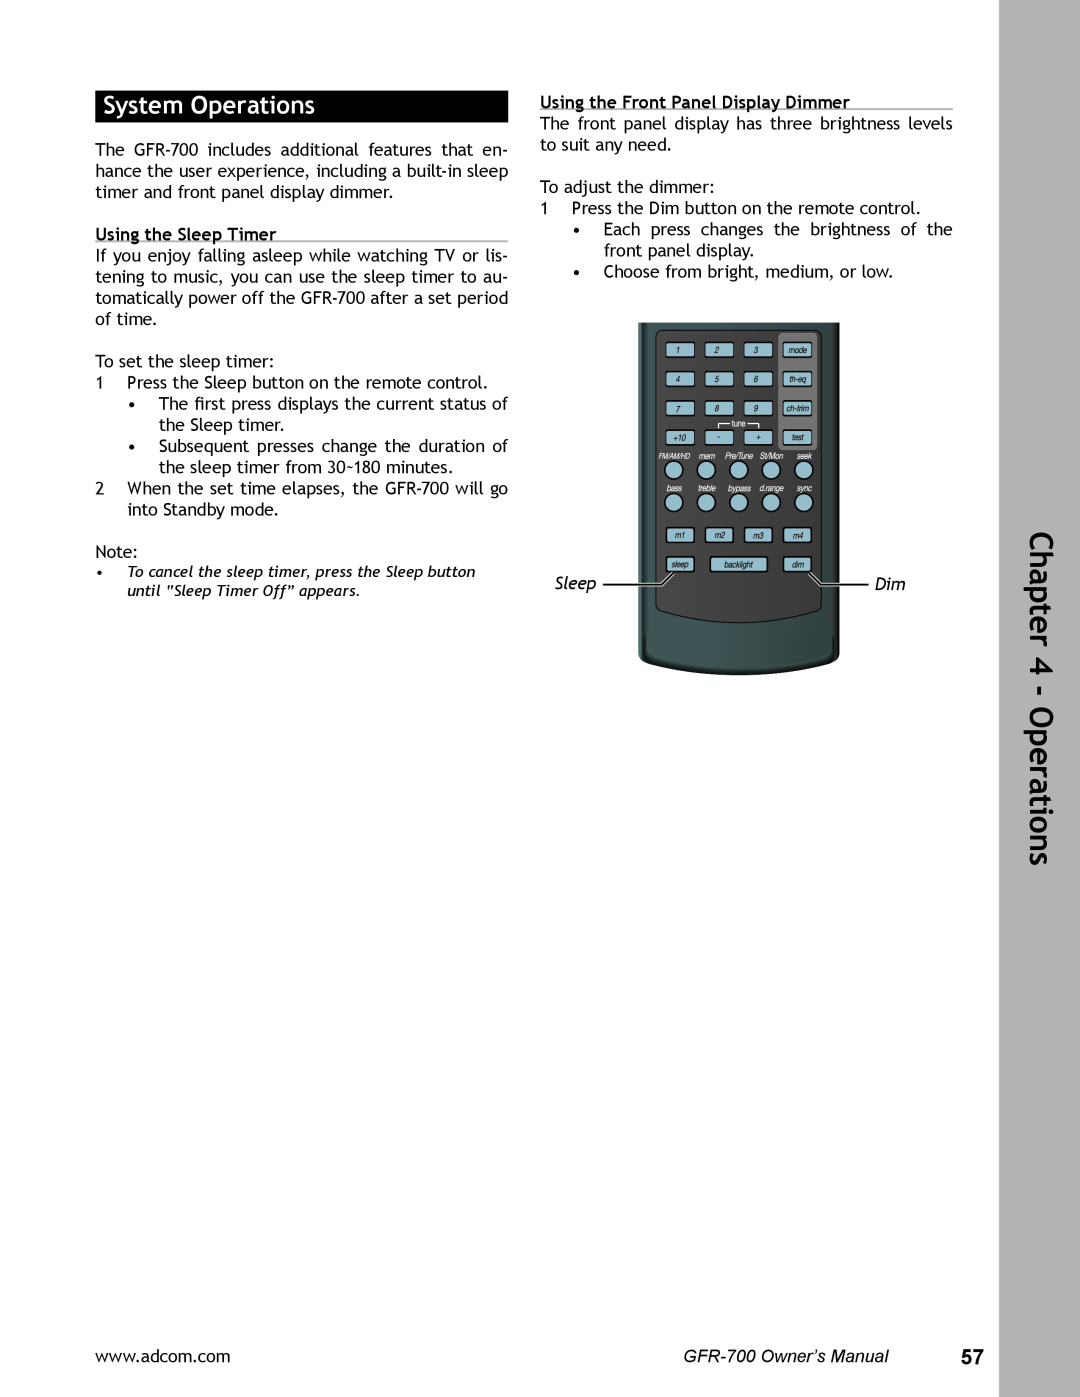 Adcom GFR-700 user manual System Operations, Using the Sleep Timer, Using the Front Panel Display Dimmer, SleepDim 